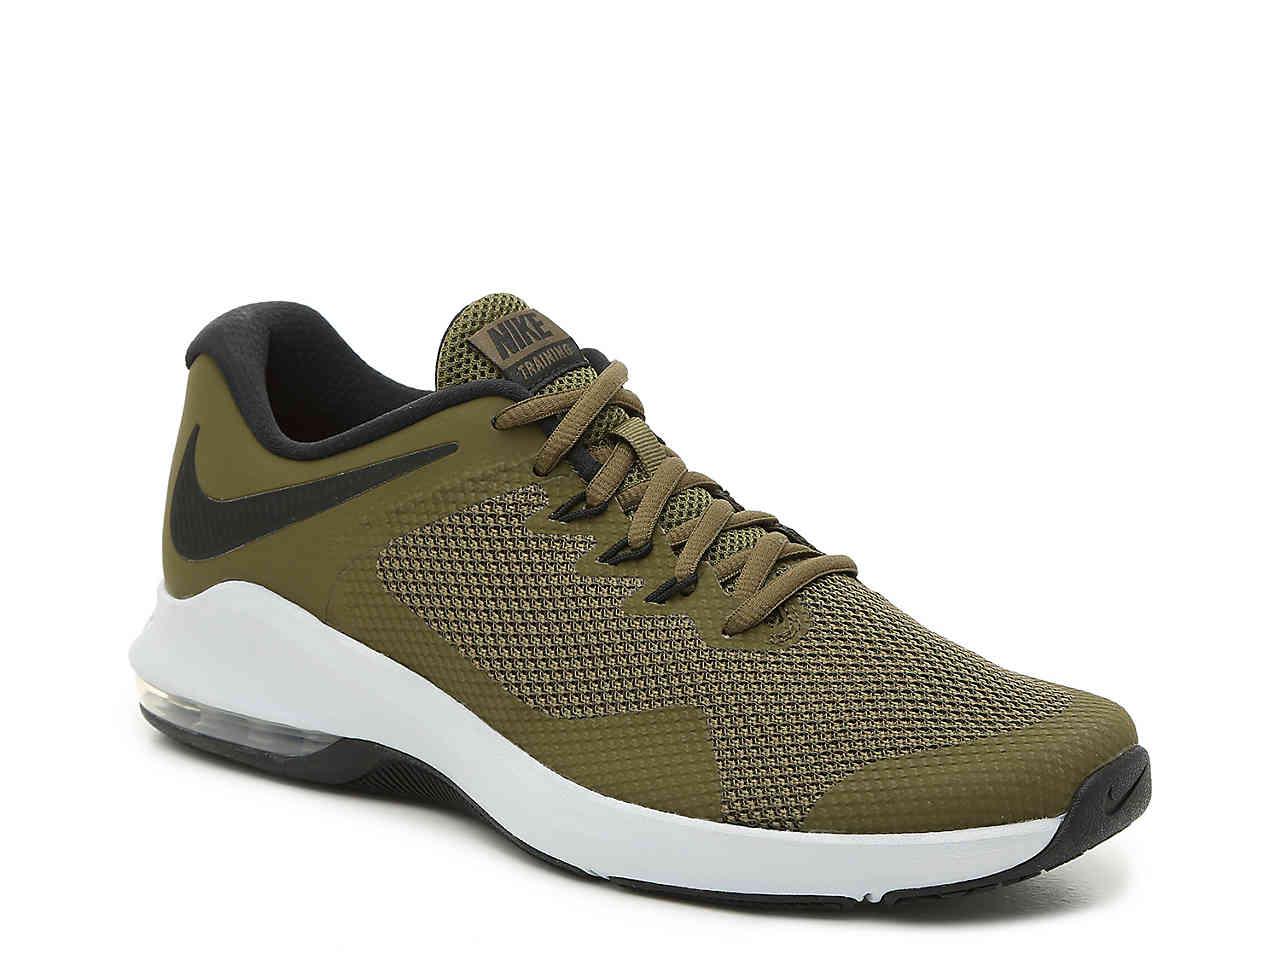 Nike Synthetic Air Max Alpha Trainer Training Shoe in Olive Green (Green)  for Men - Lyst